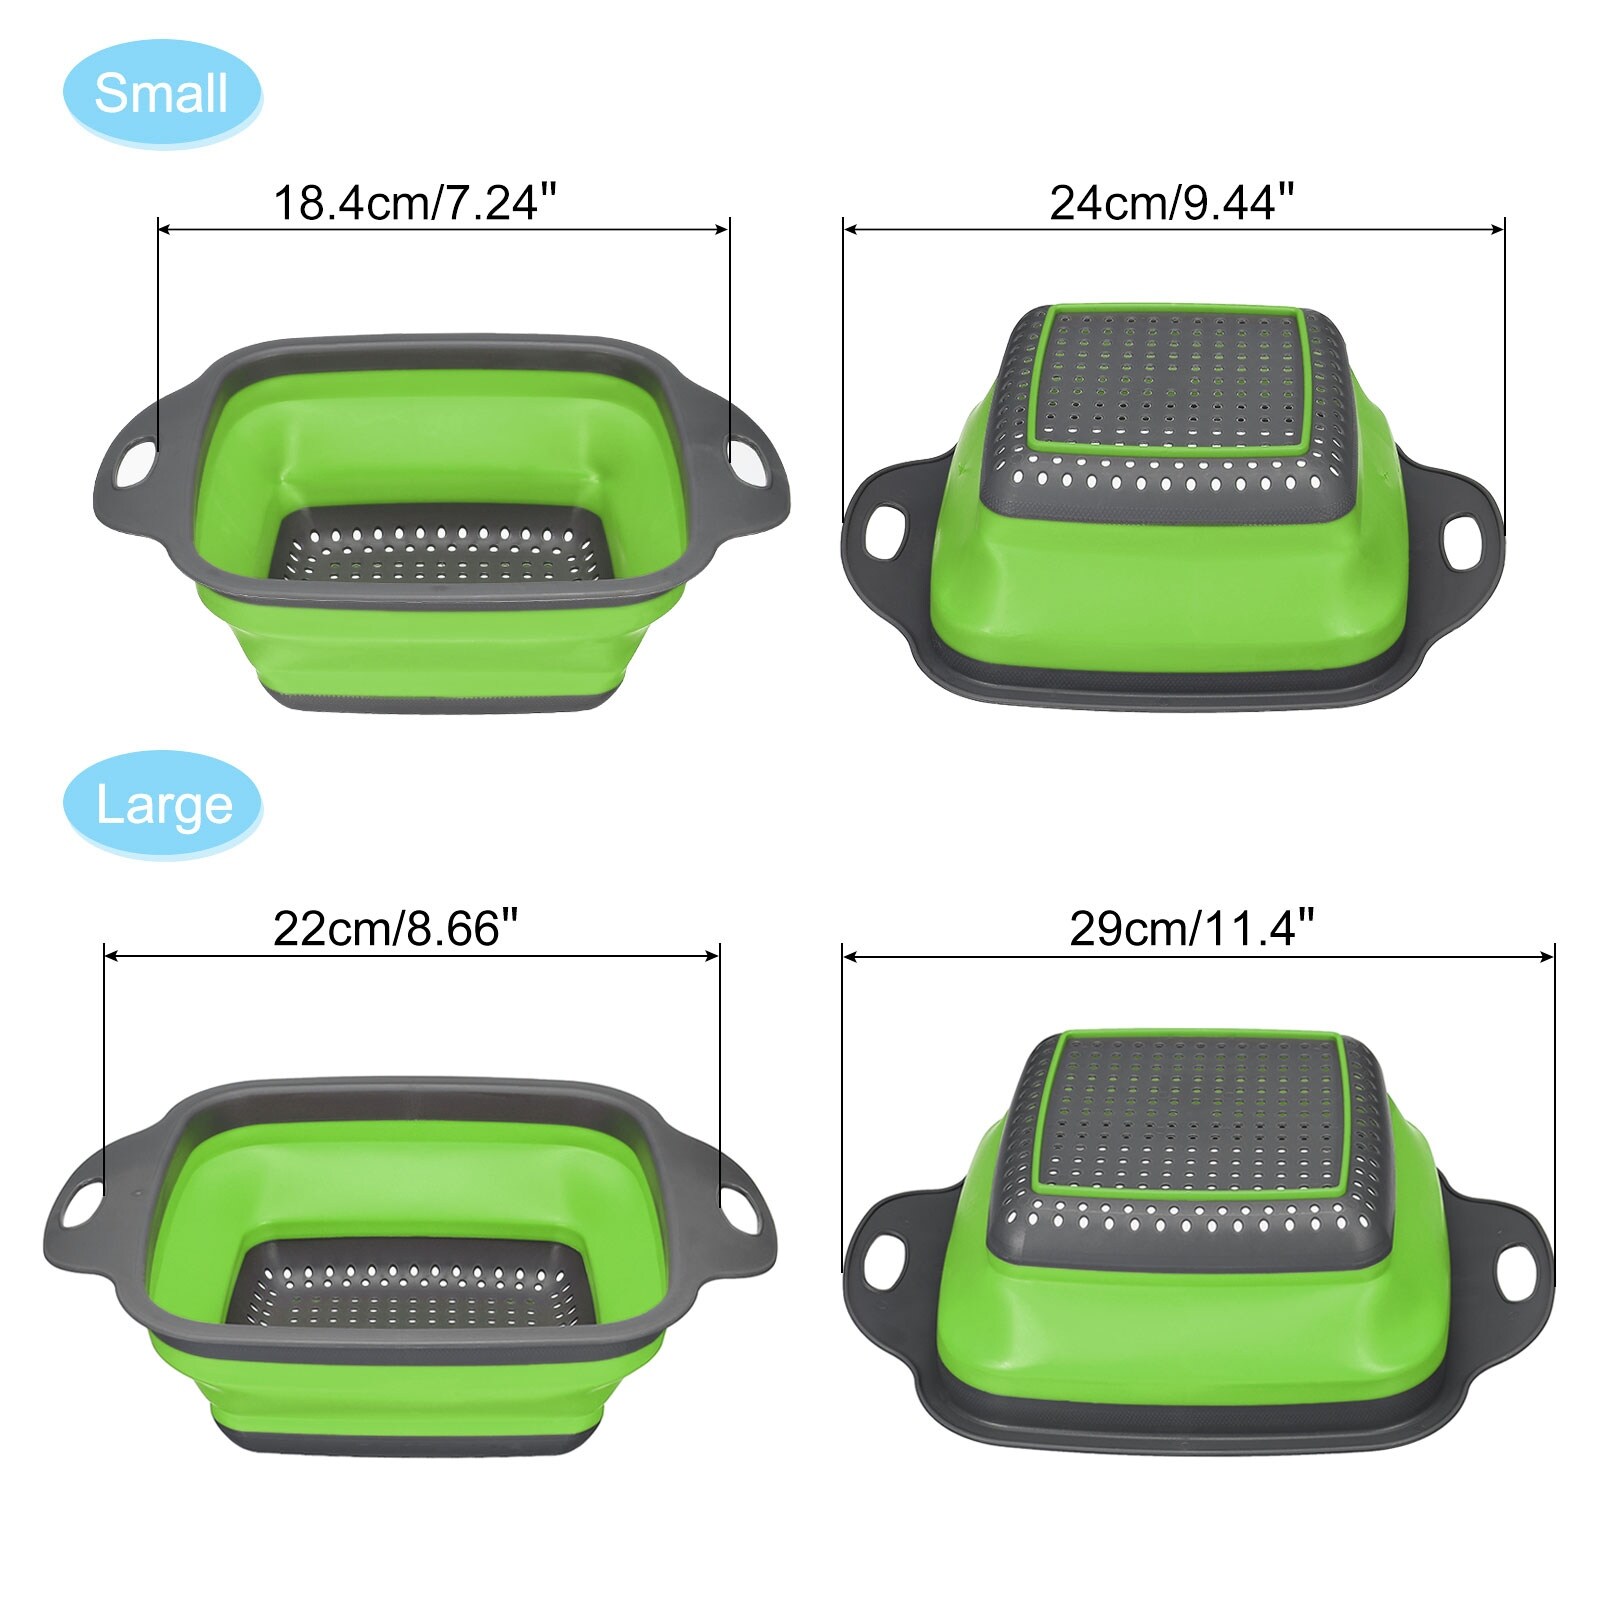 Collapsible Colander Set, 2 Size Silicone Square Foldable Strainer - Green - 29cm x 22cm x 9cm